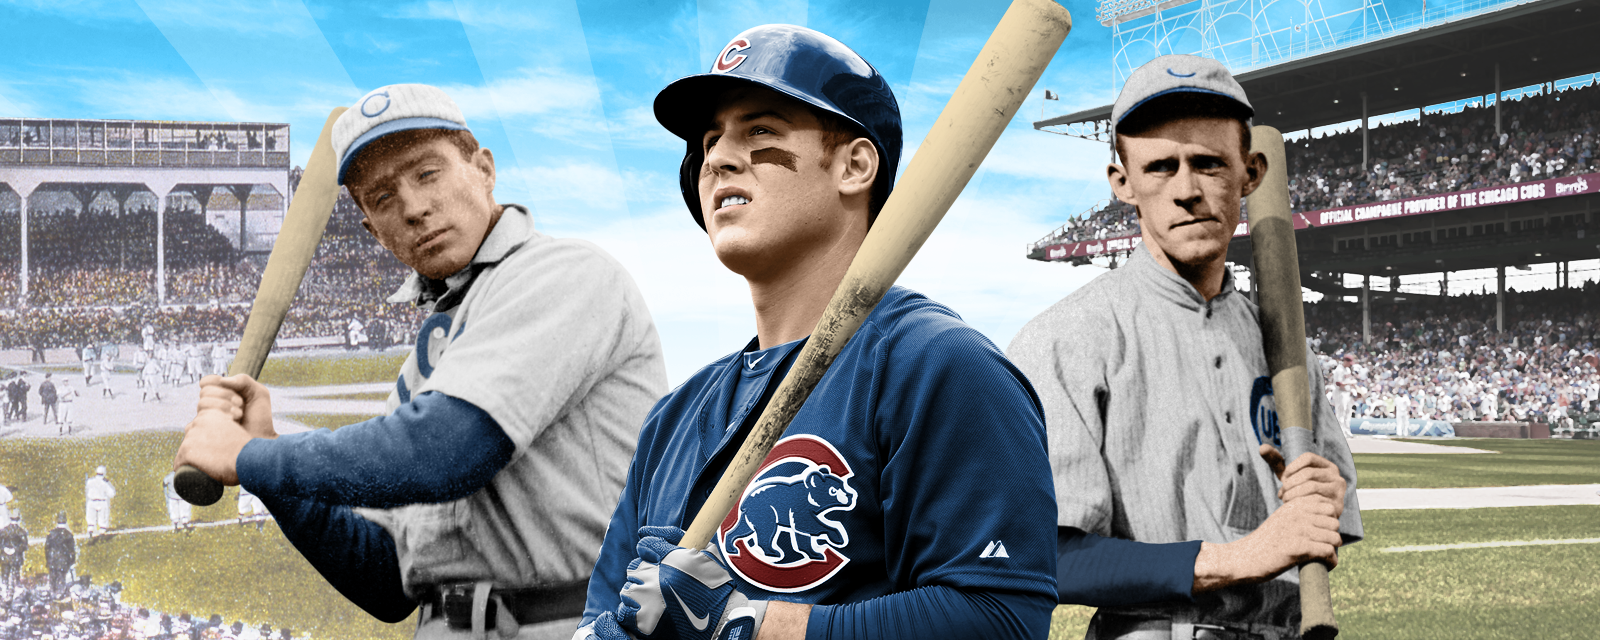 1908 World Champion Chicago Cubs -COLORIZED!!!!!